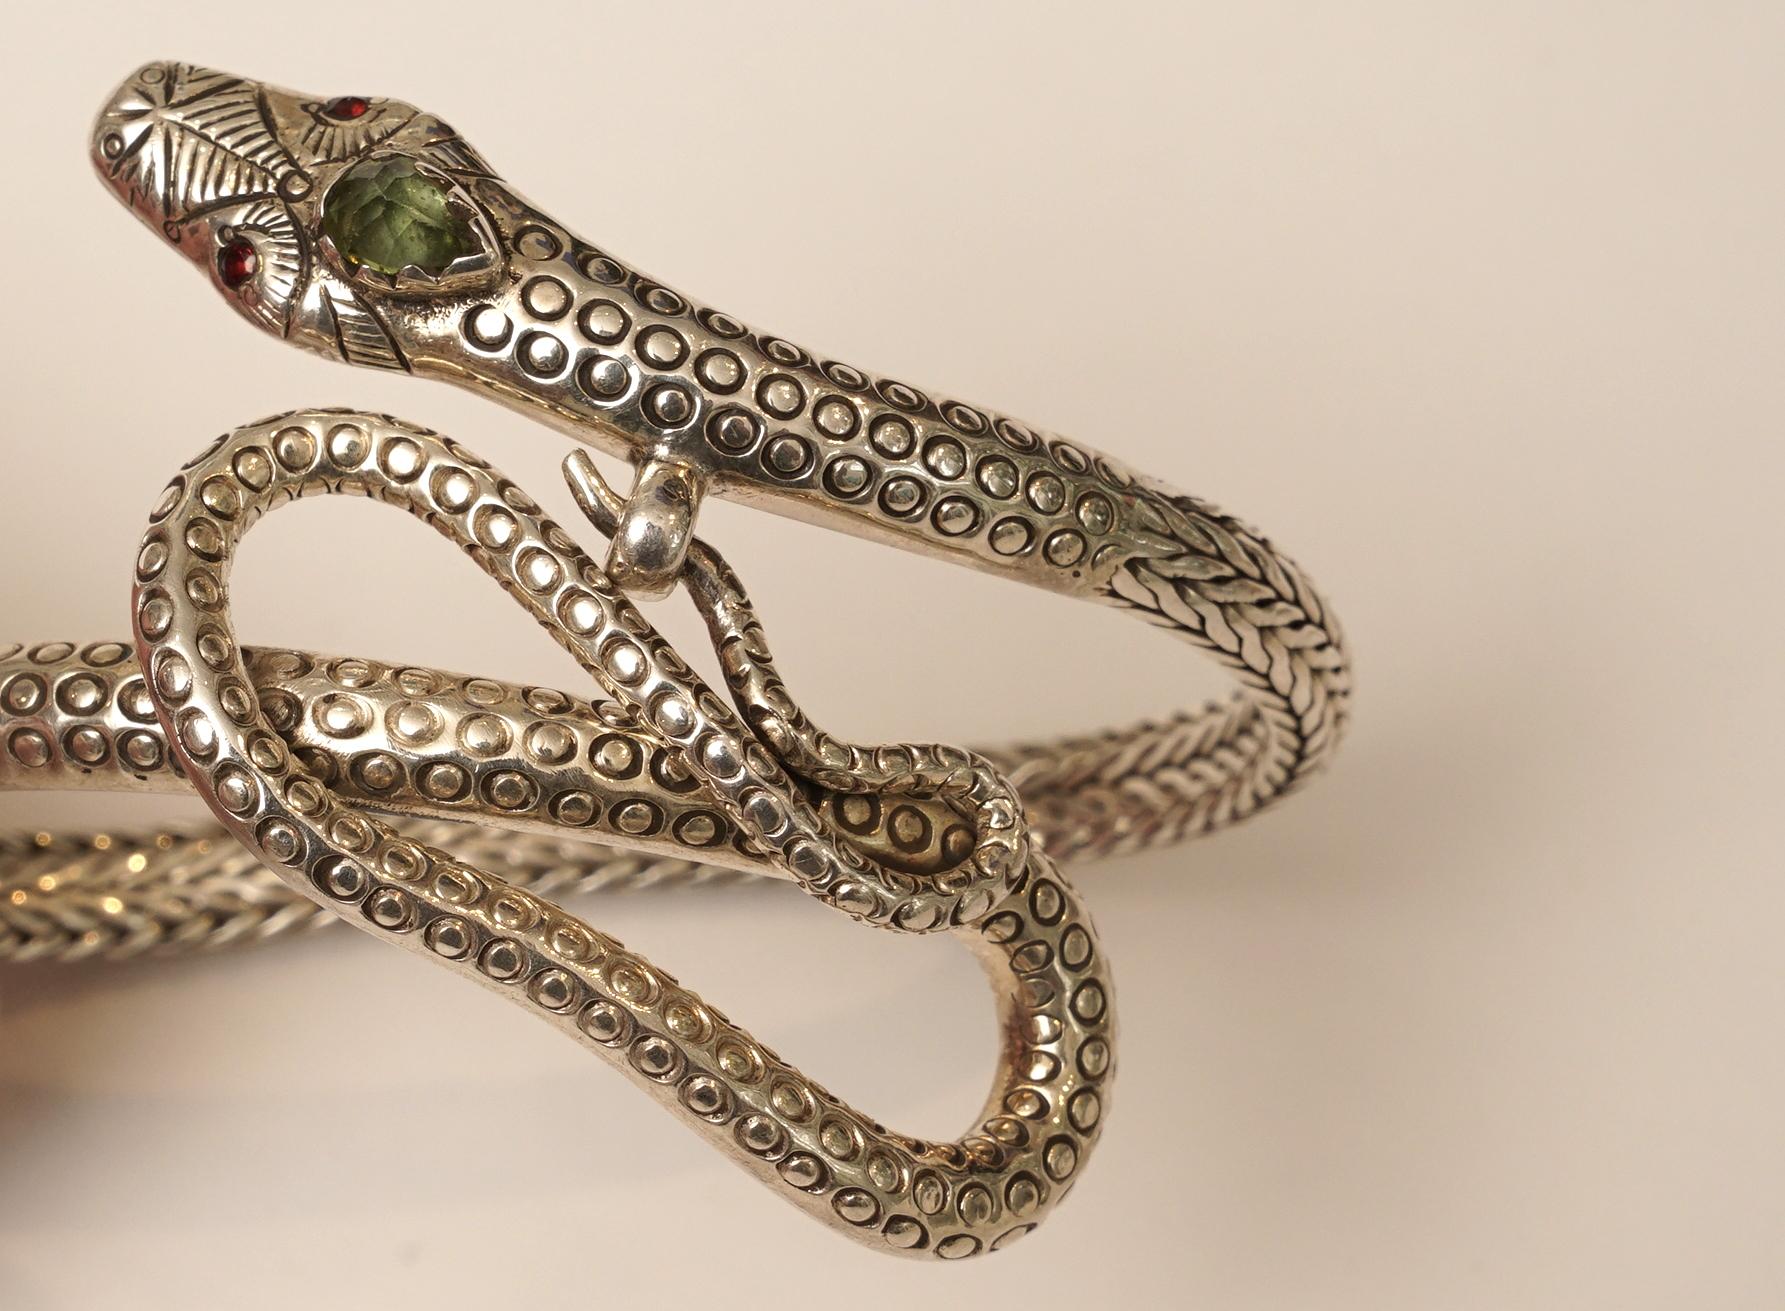 Finely tooled sterling silver coiled snake bracelet with garnet eyes and peridot third eye. The tail of the snake pushes through the ring just below the head of the snake.  Unusual.  The inside circumference is 6 inches.
The height is 1.5 inches.
